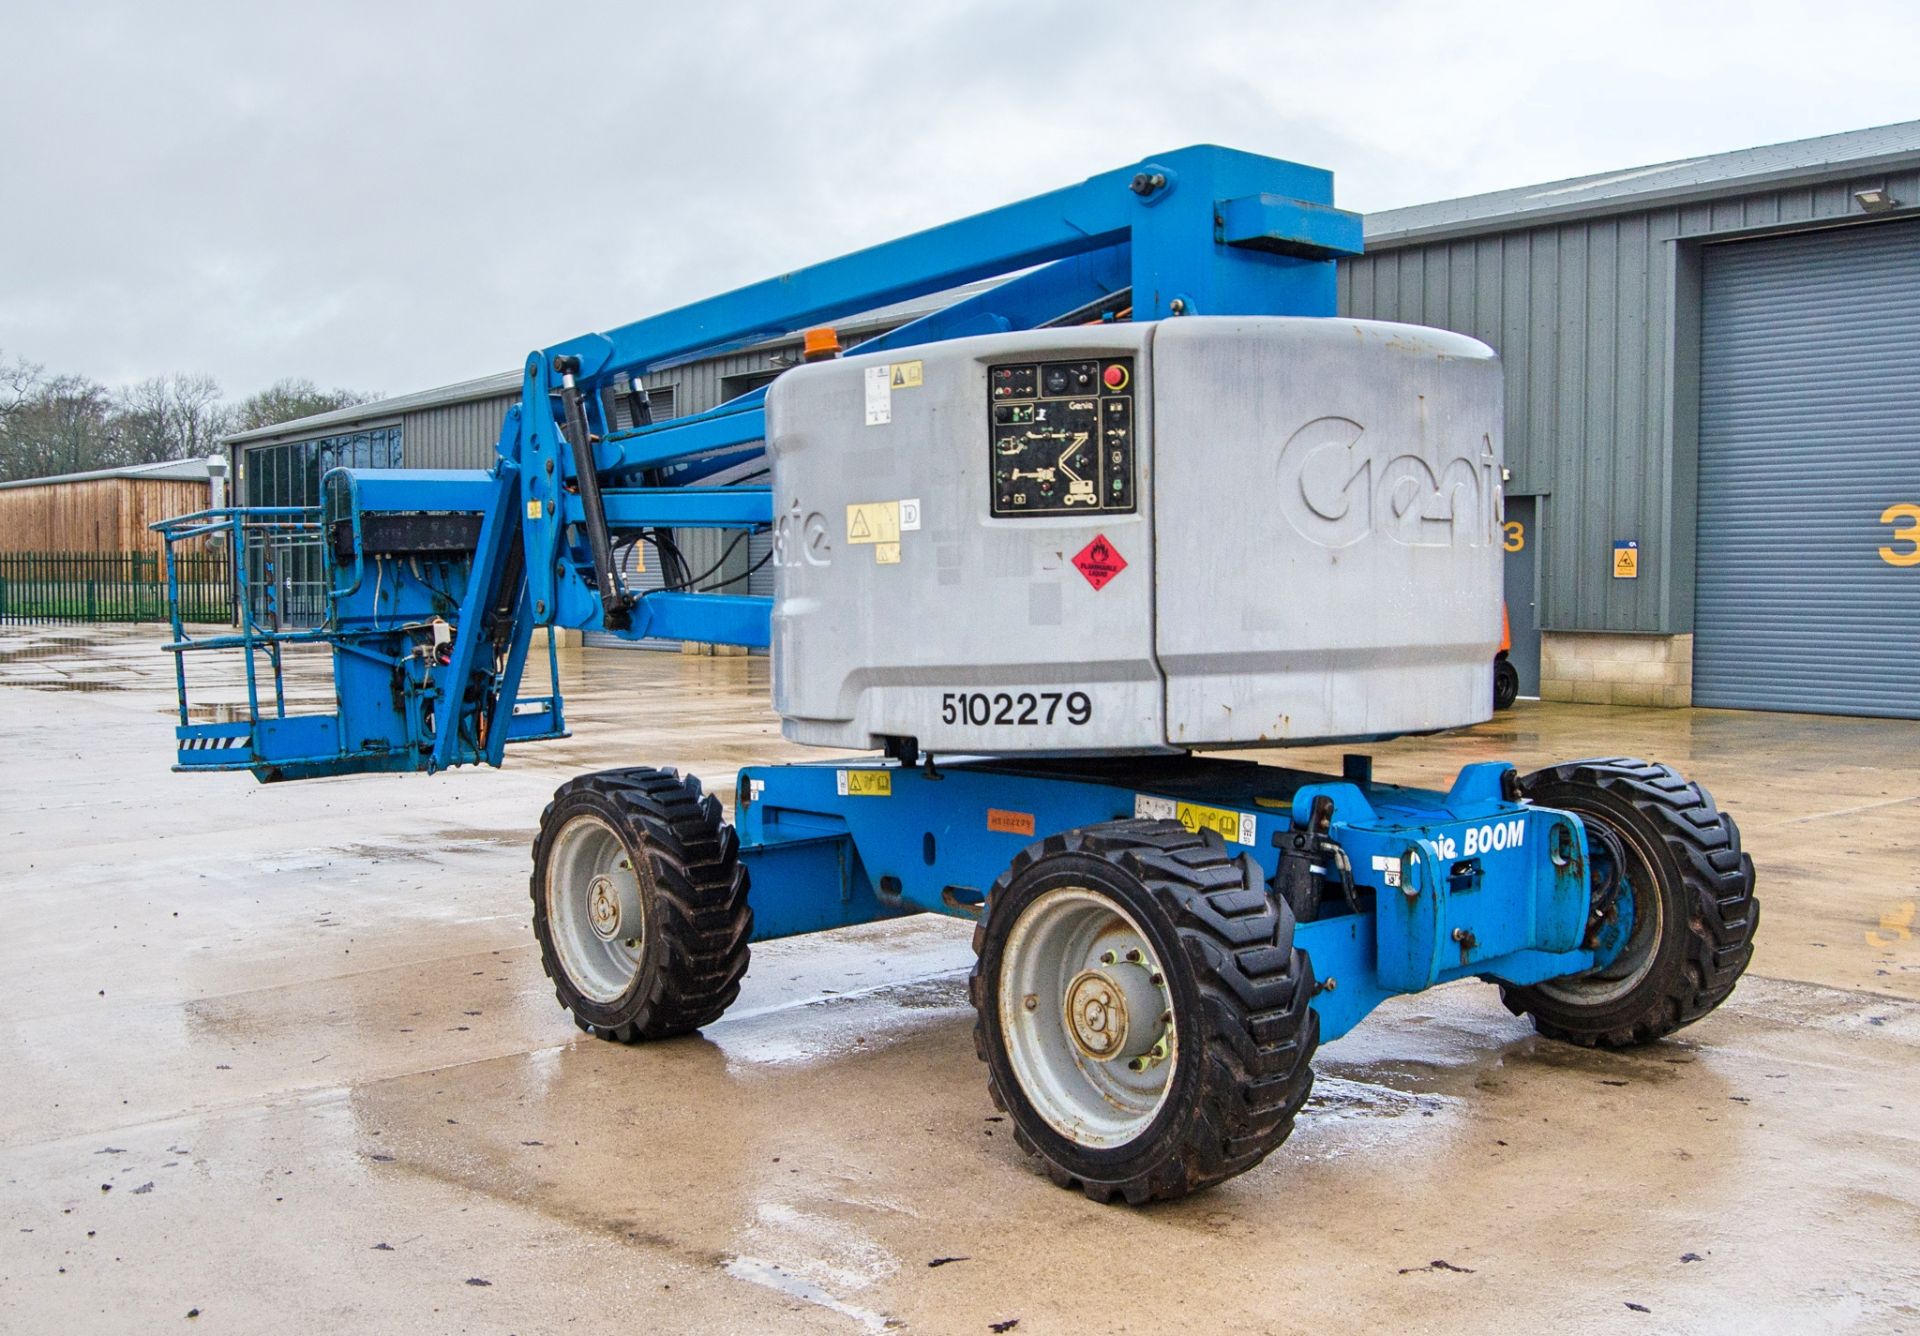 Genie Z45/25J diesel/battery electric 4 wheel drive articulated boom lift access platform Year: 2014 - Image 4 of 19